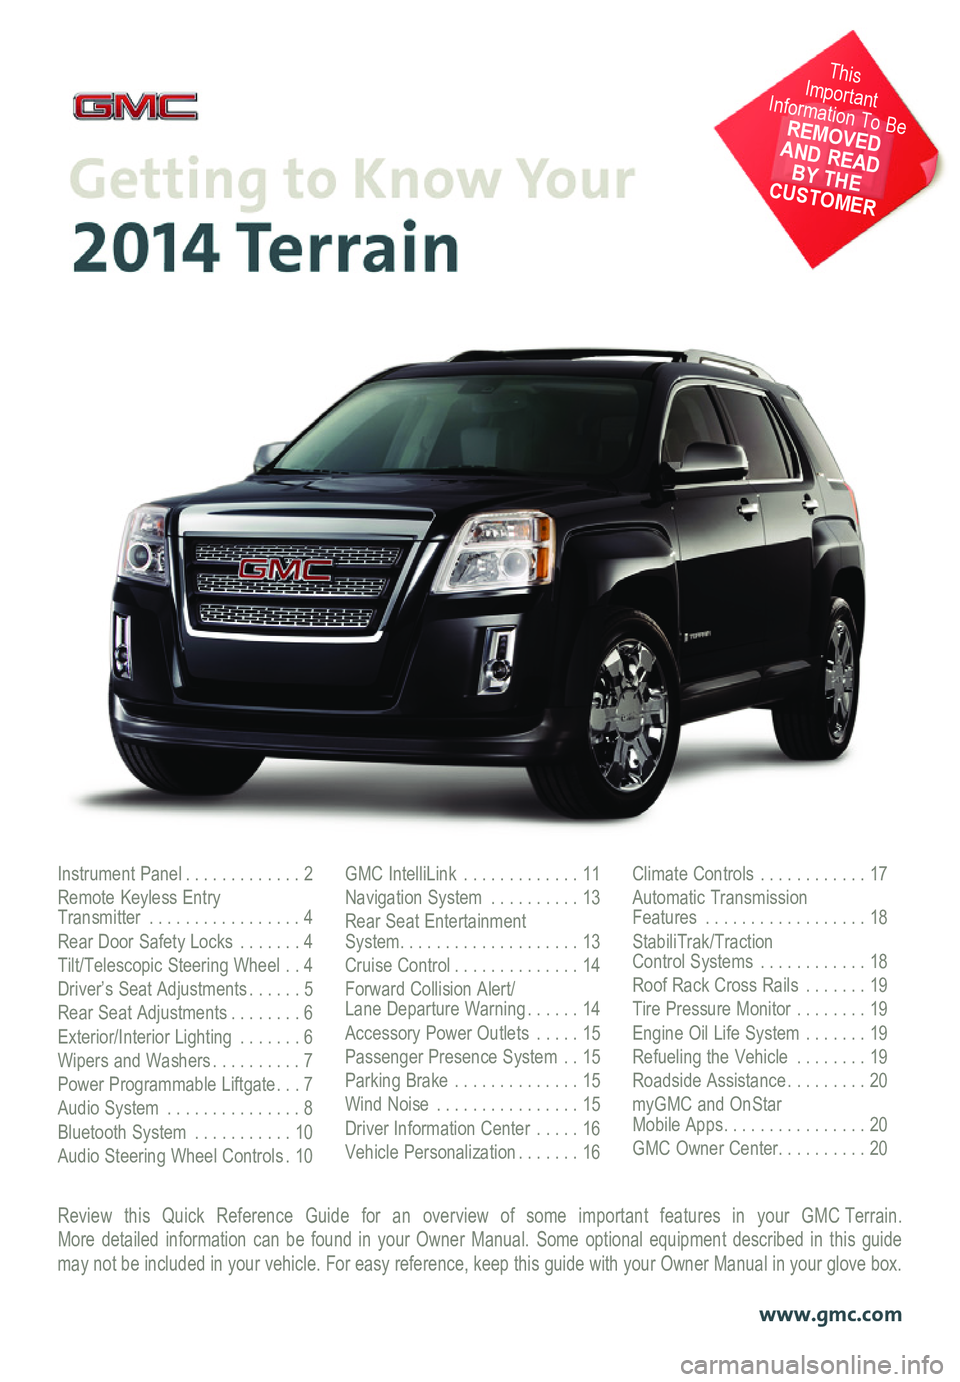 GMC TERRAIN 2014  Get To Know Guide 